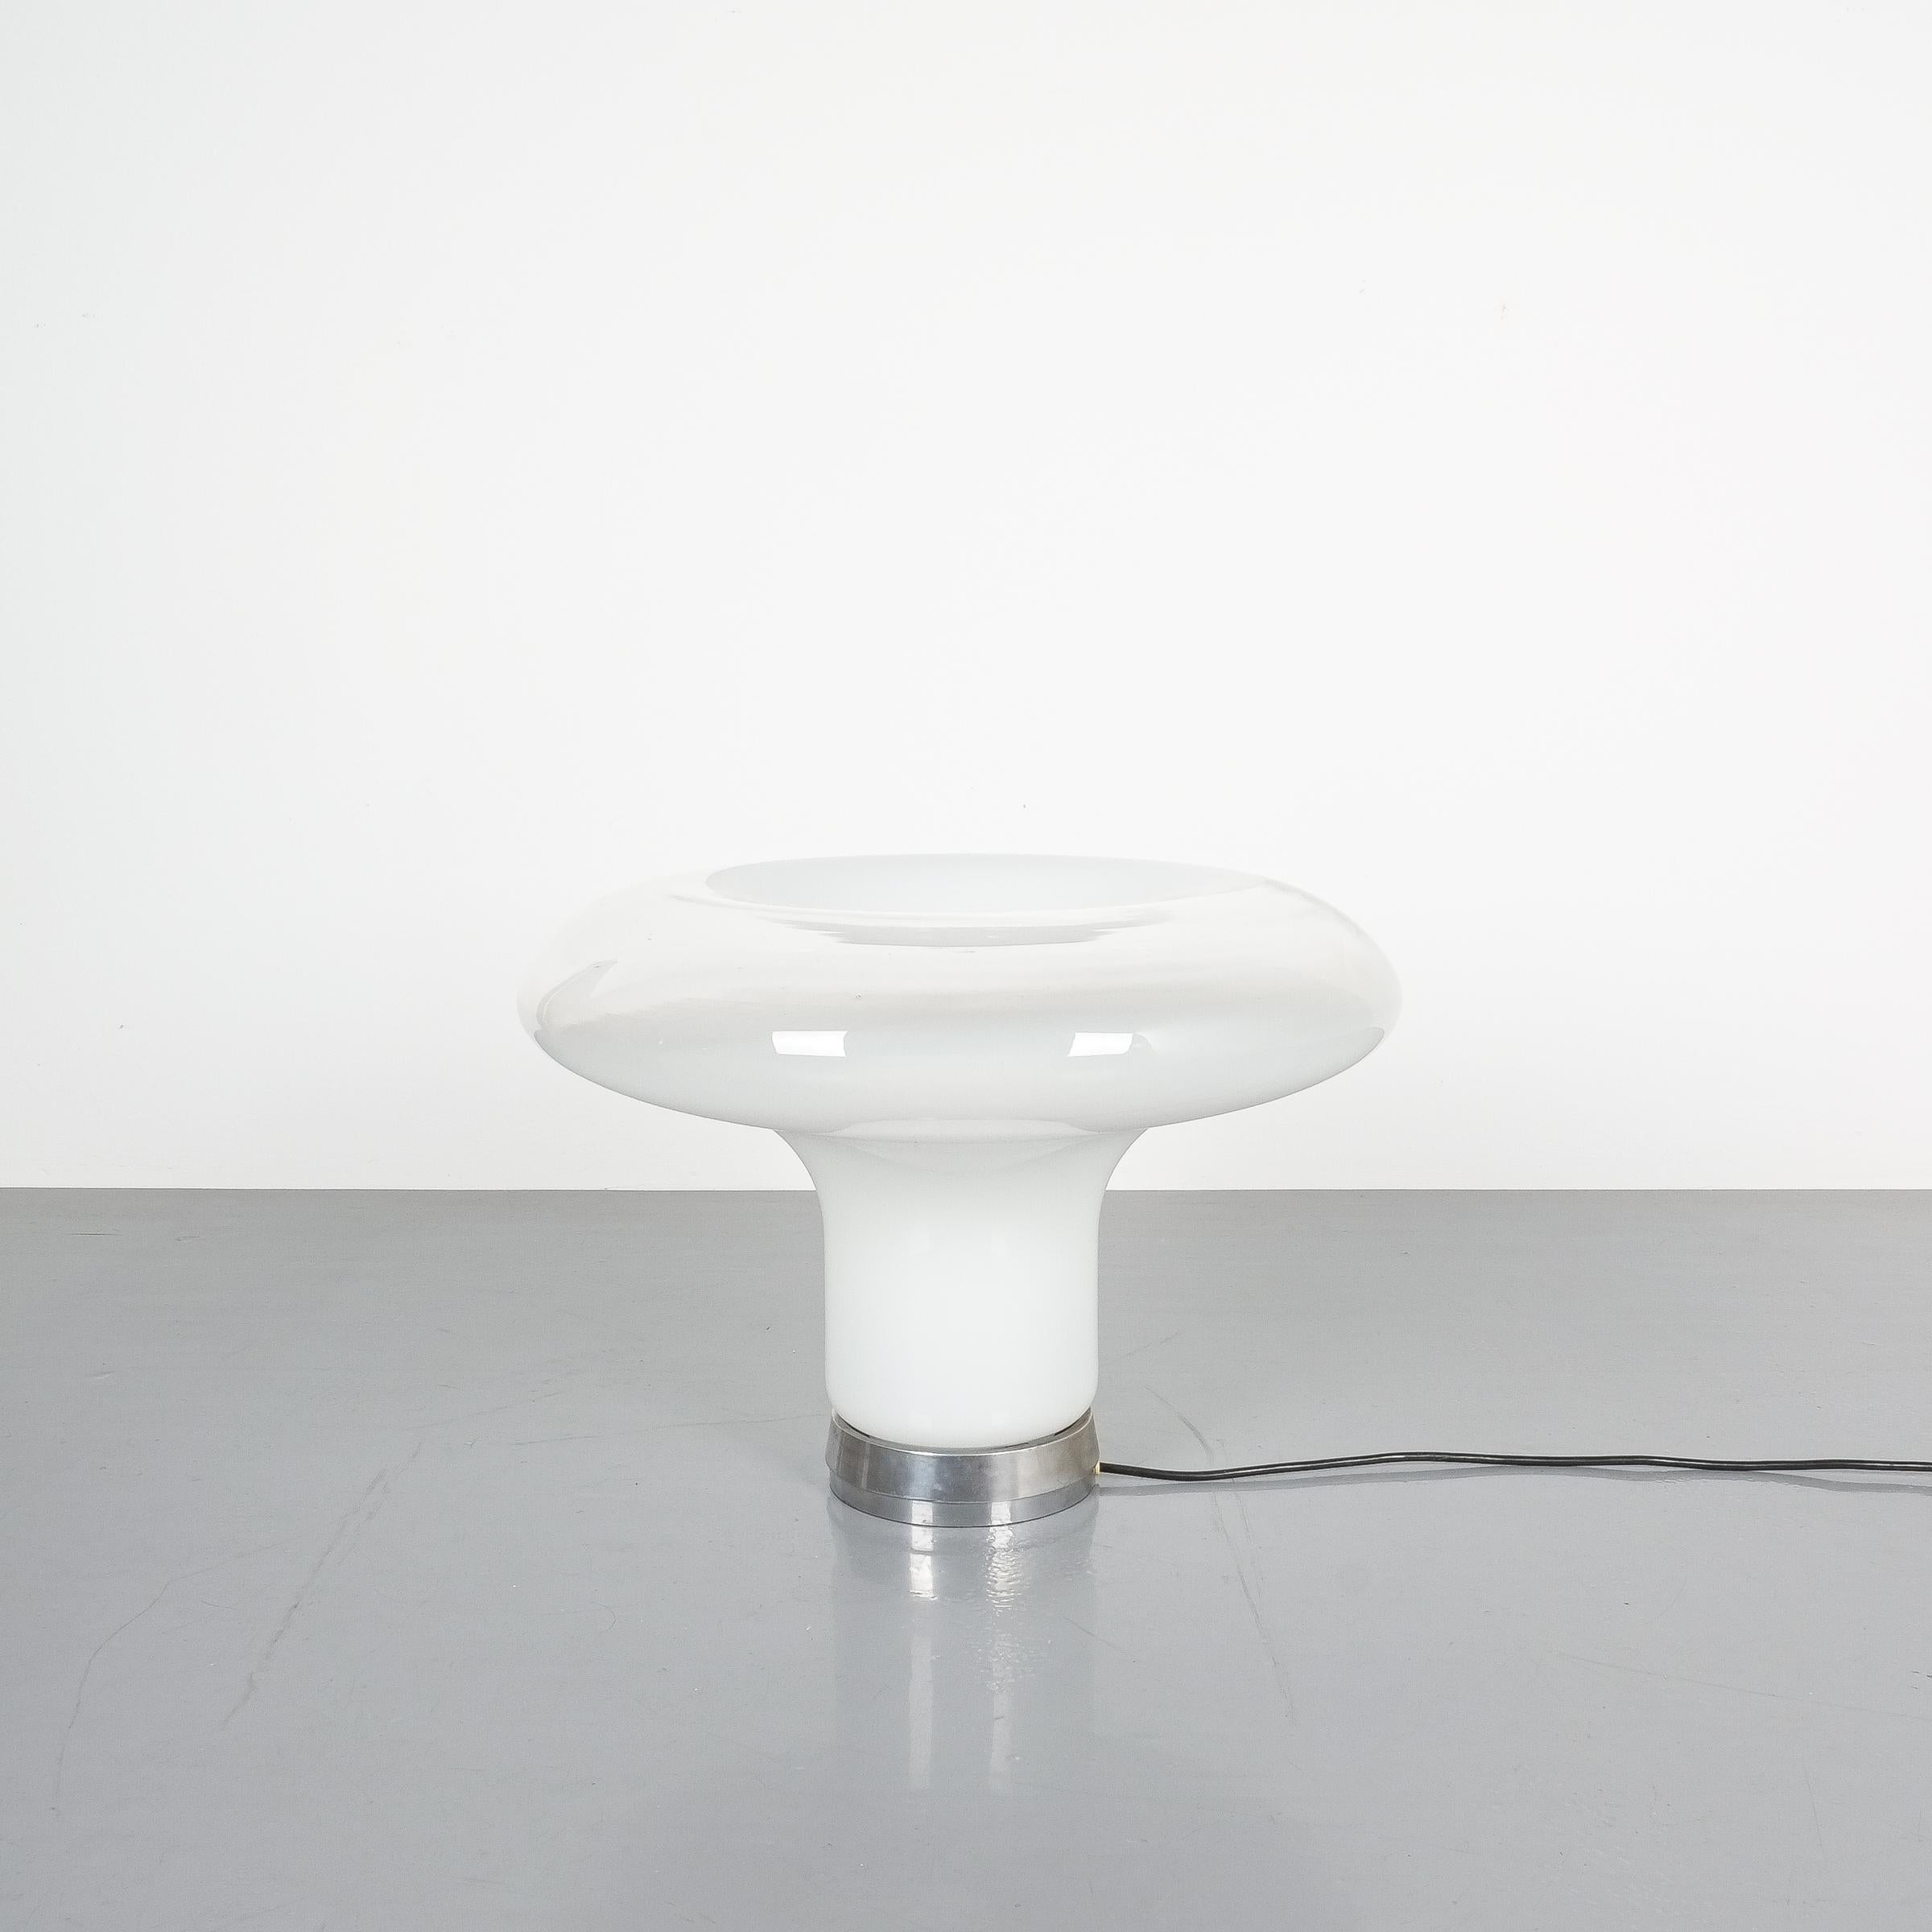 Angelo Mangiarotti Lesbo Table Lamp Artemide, Italy, 1967. Truly iconic and impressive 19.7